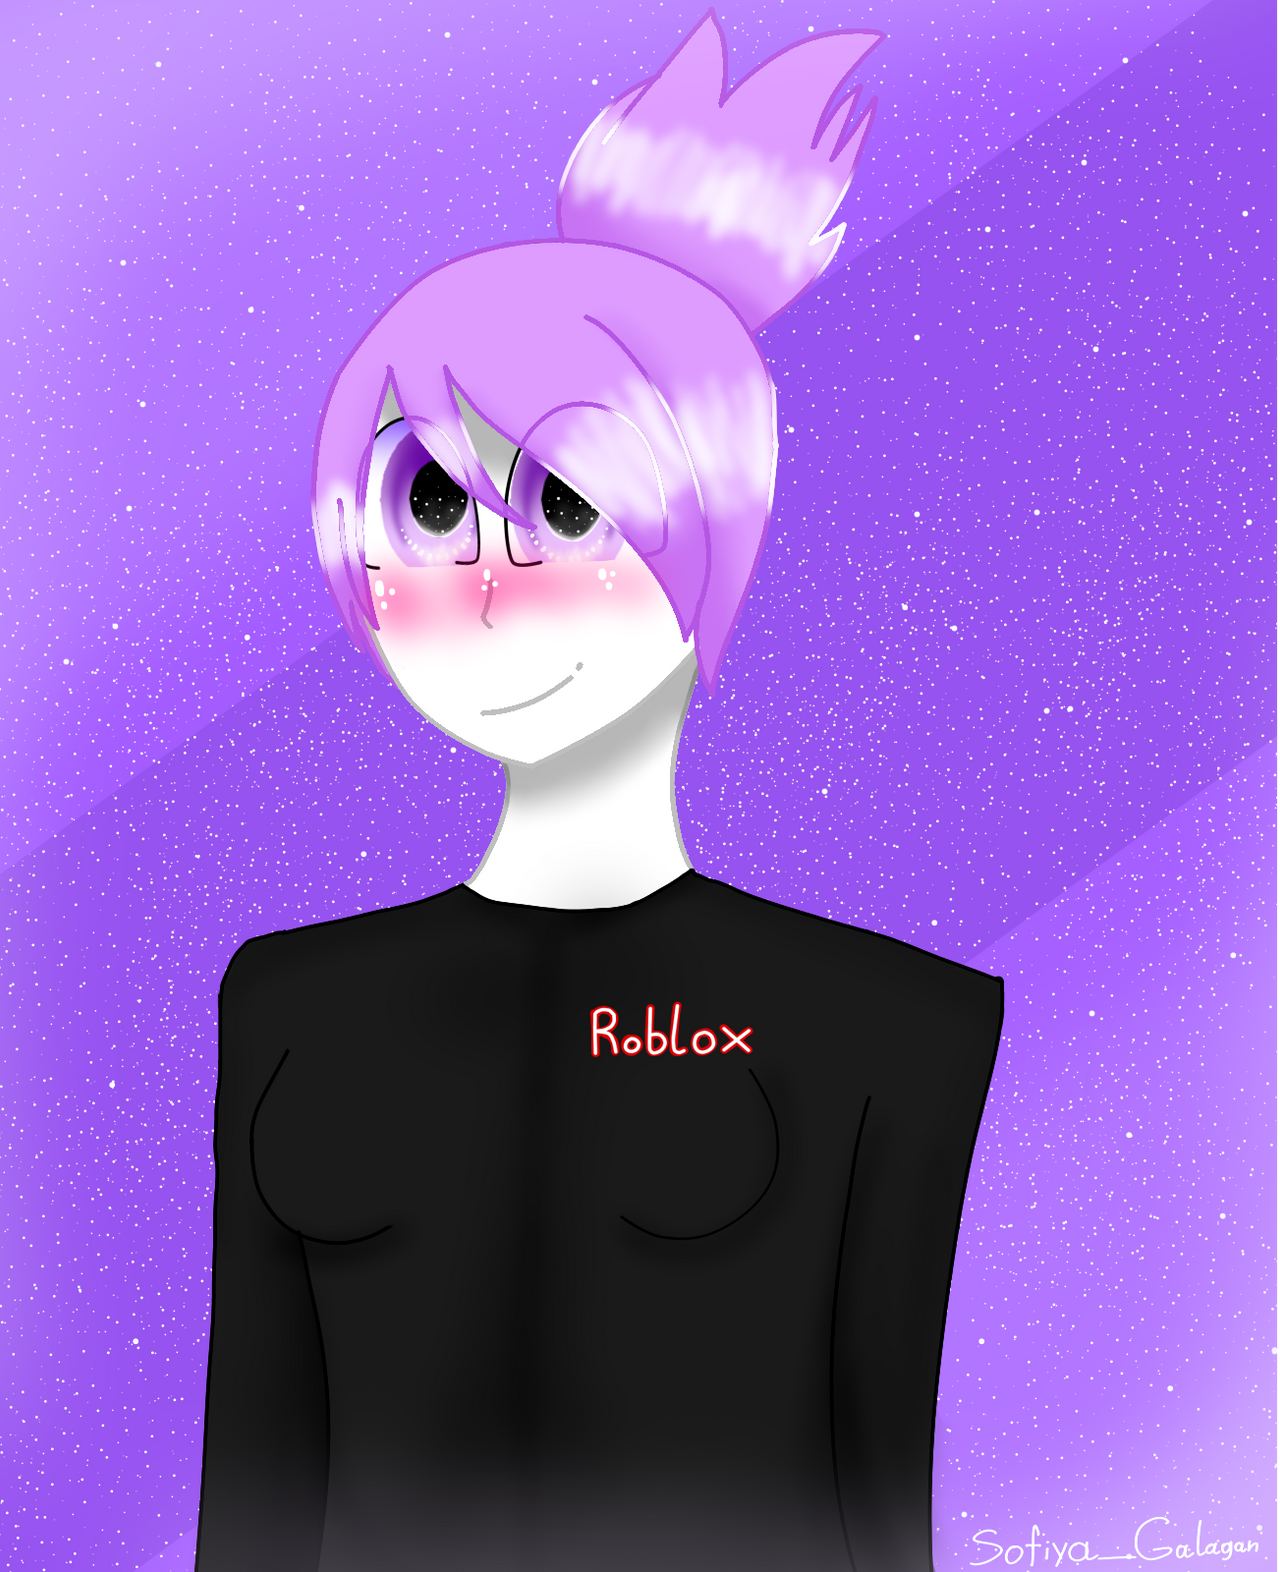 ꔫ comms open on X: Arent guests just so pretty? #roblox #robloxart  #robloxguest #guest #art #robloxfanart #fanart  / X